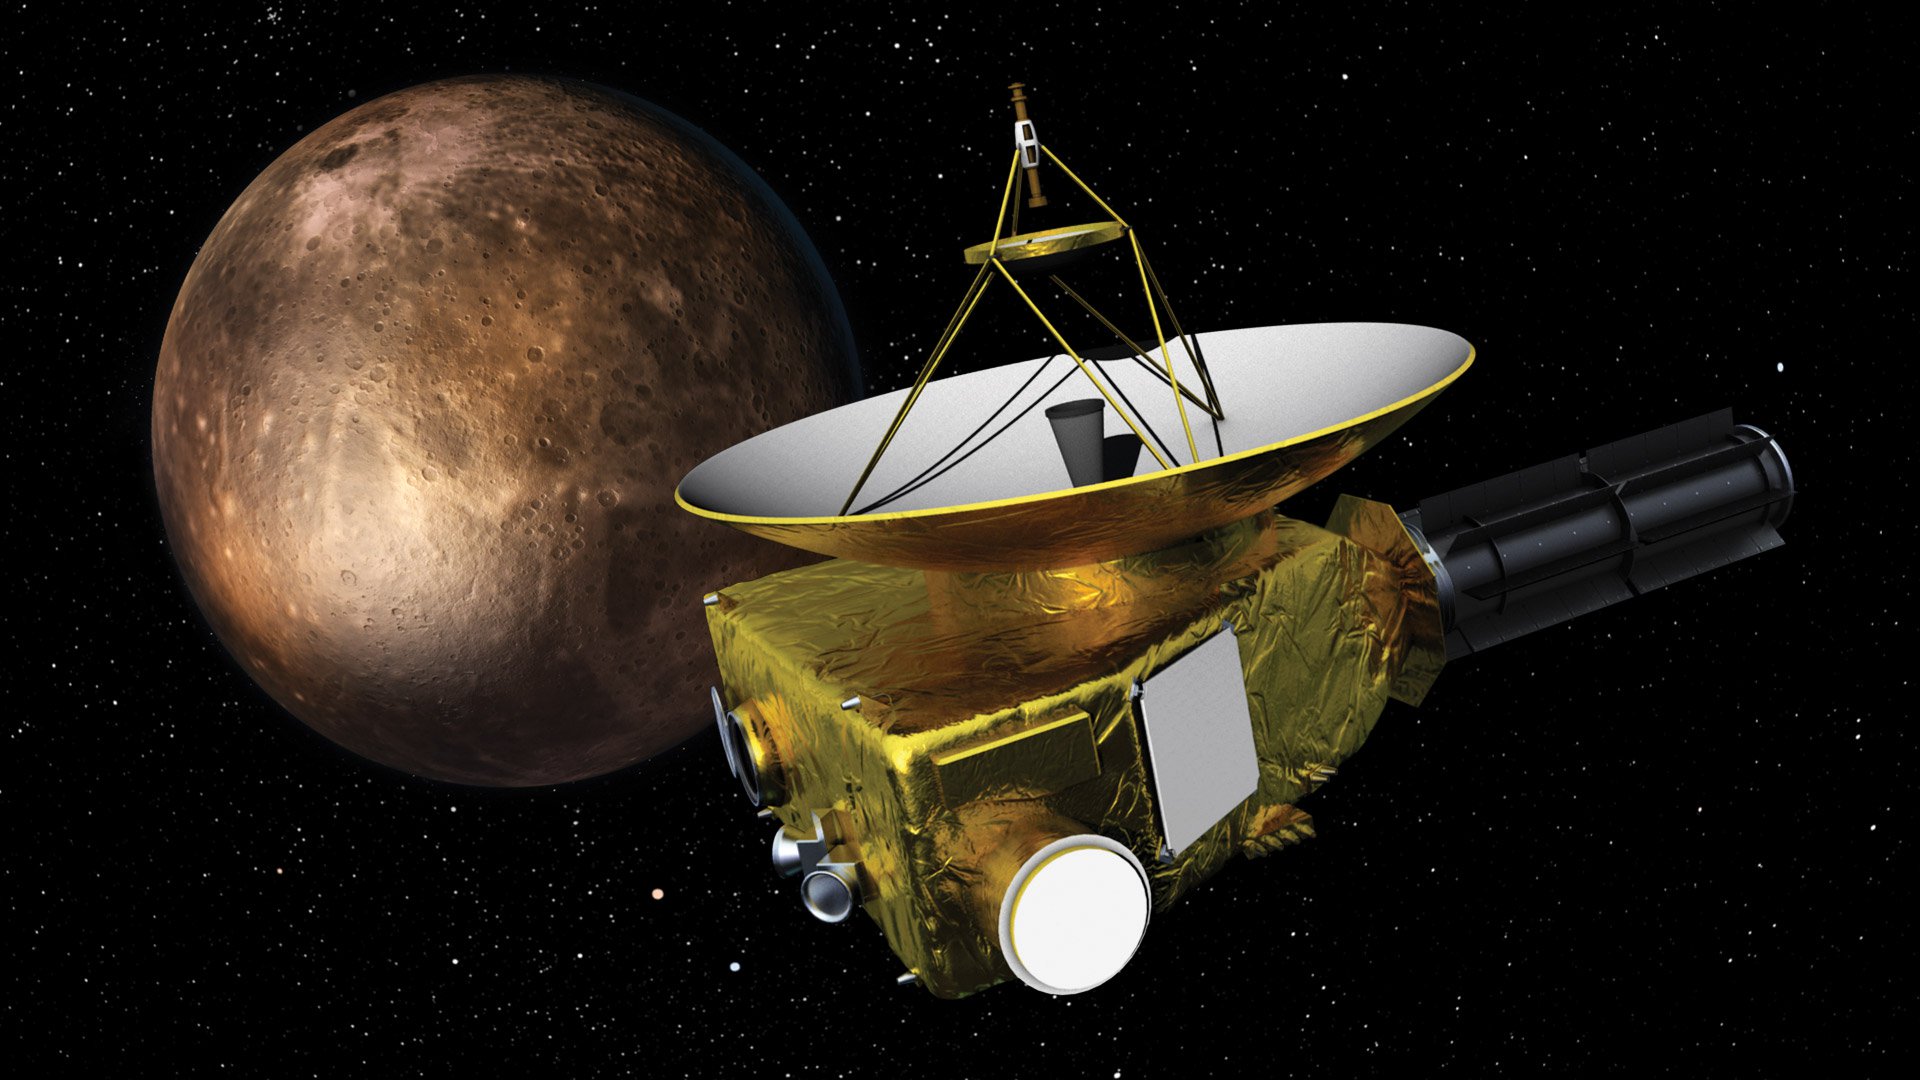 Pluto is left behind. Next stop mankind: Ultima Thule